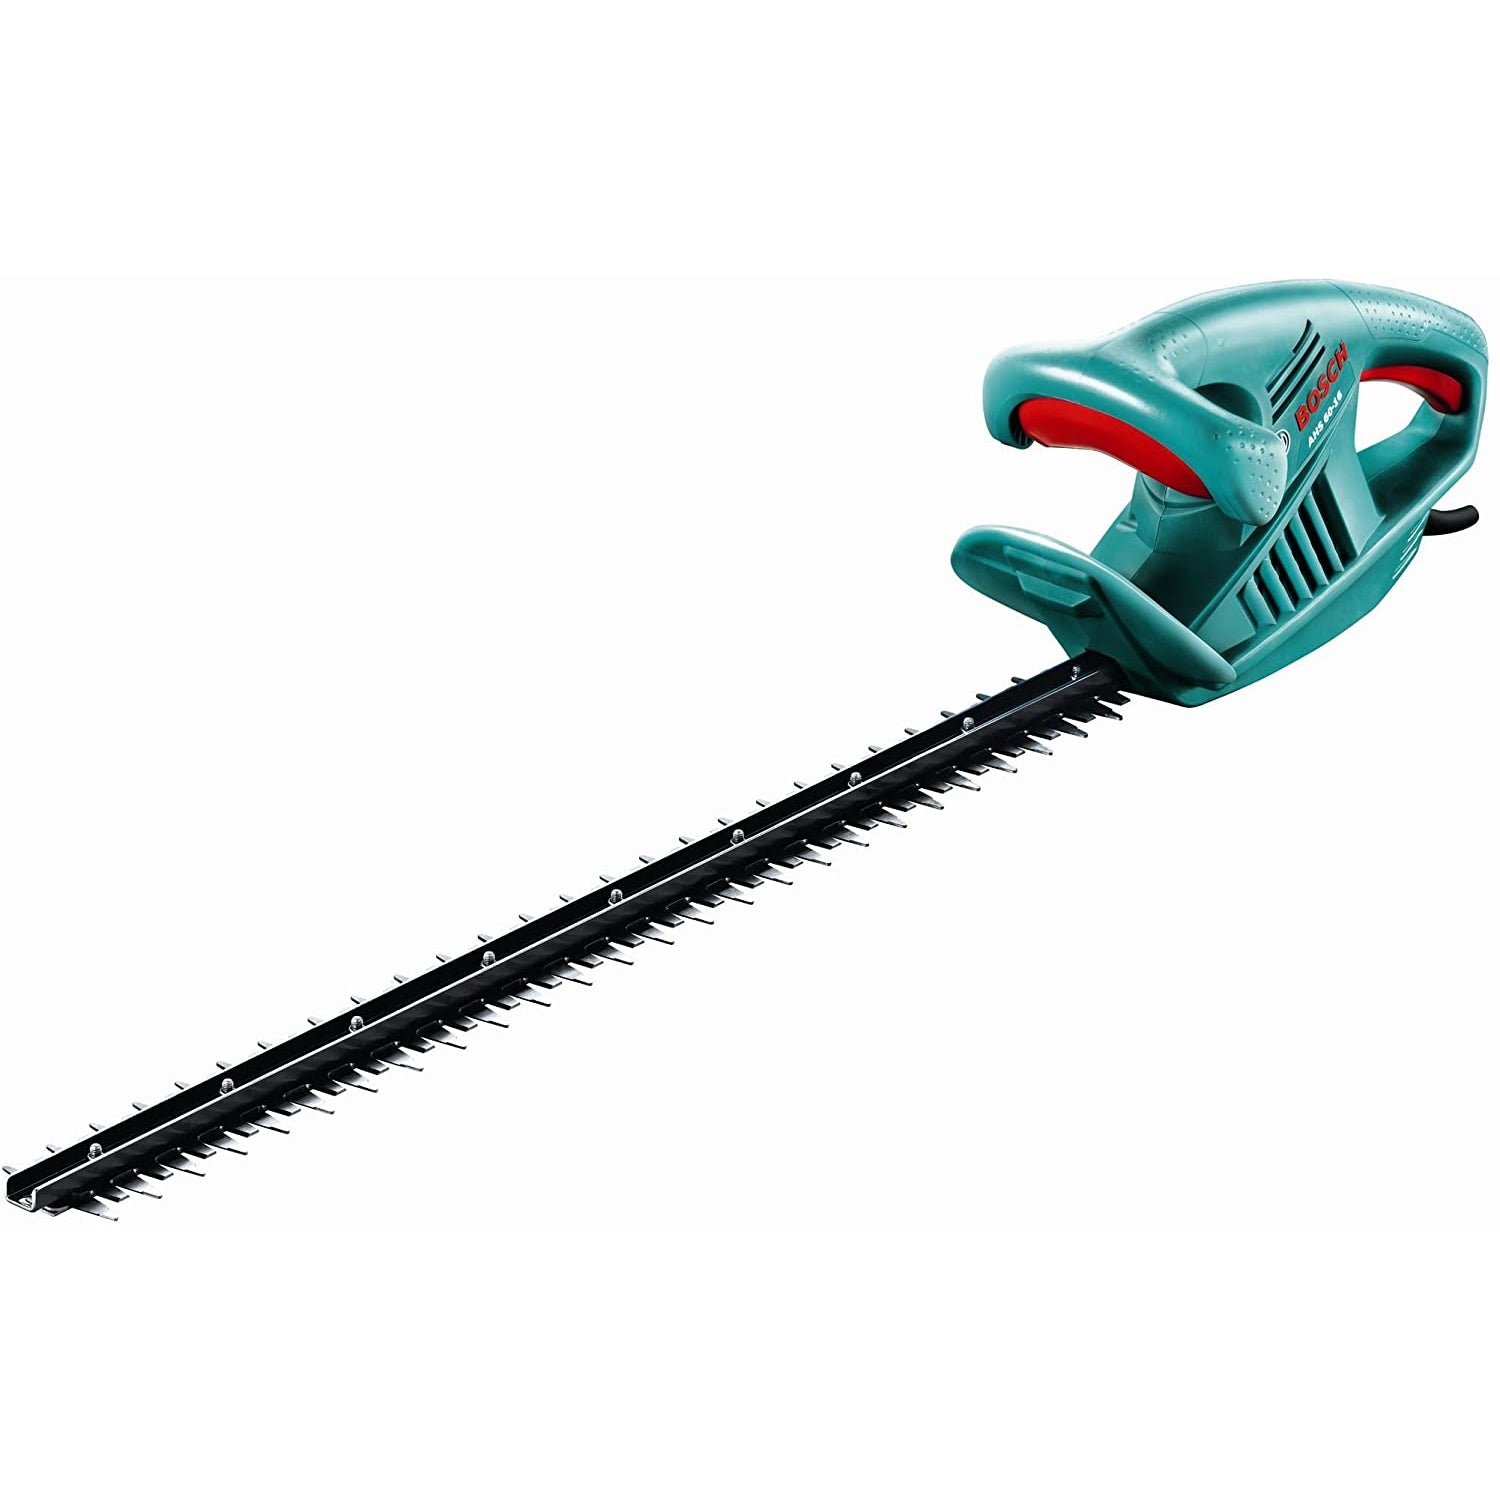 Bosch 0600847D70, AHS 60-16 Electric Hedge Cutter, 600 mm Blade Length, 16 mm Tooth Opening, Green